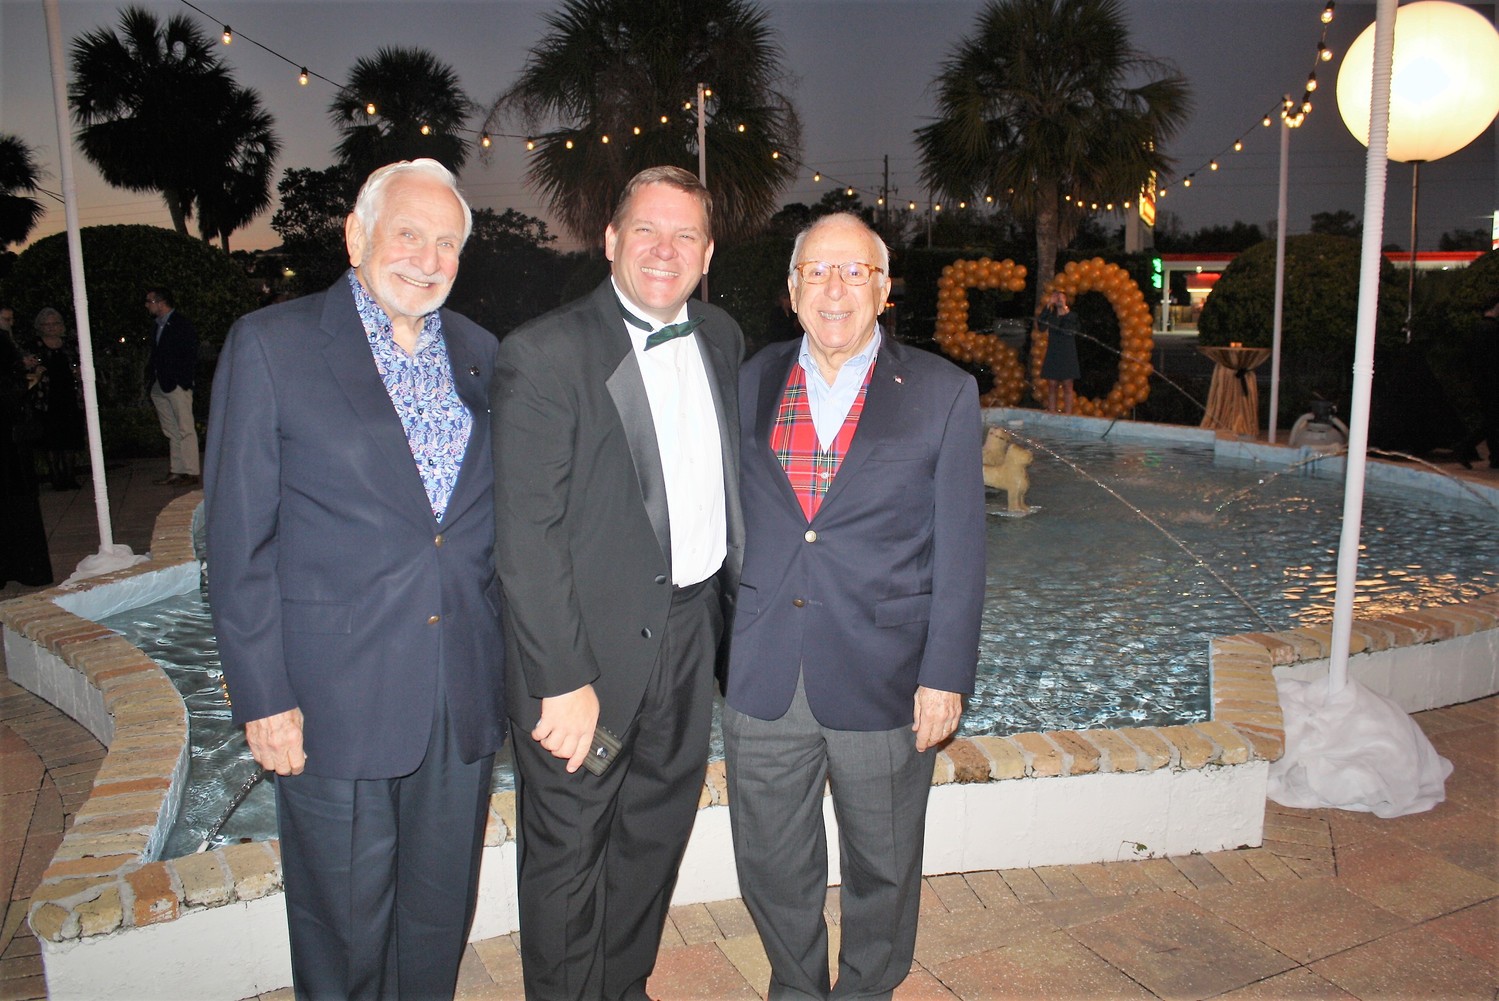 Alhambra Managing Partner Craig Smith (center) stands with former Alhambra owner Ted Johnson (right) and Barry Zisser (left).